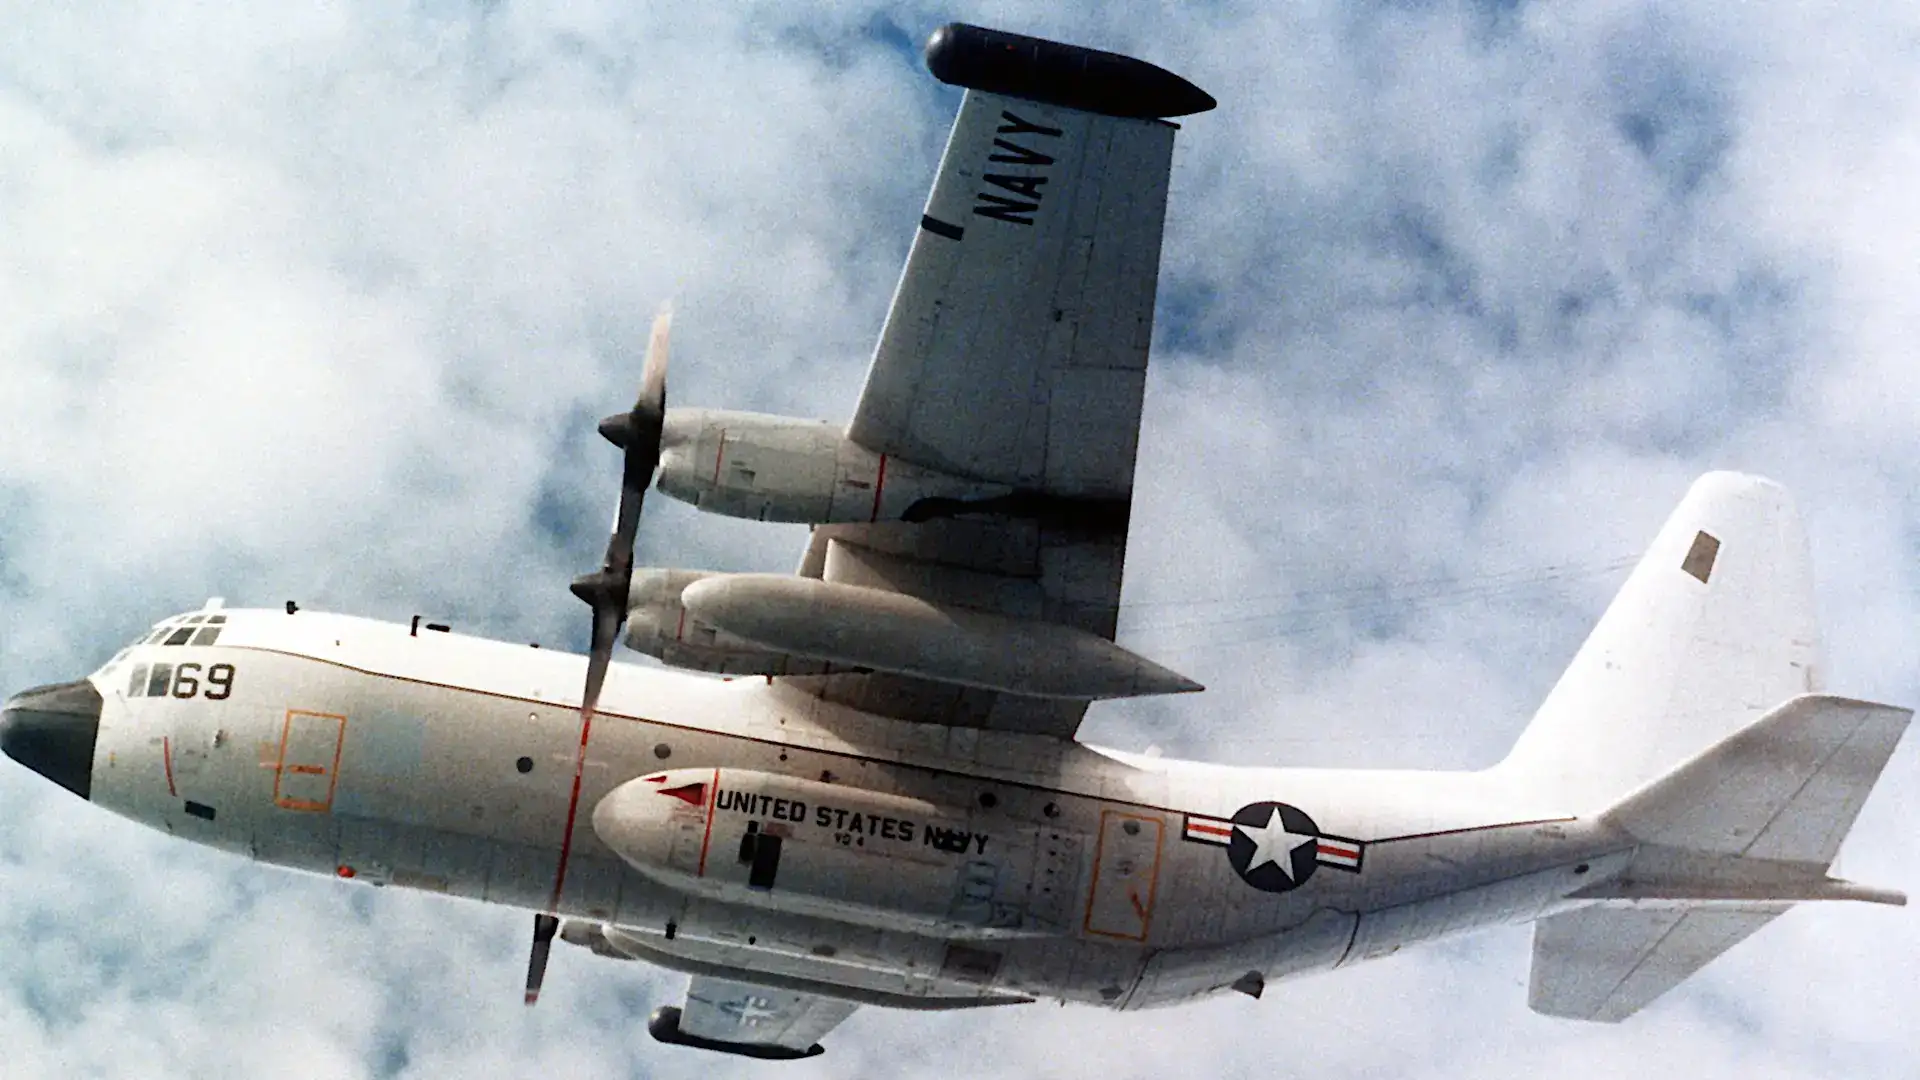 This Is Our First Look At The Navy’s Next 'Doomsday Plane,' The EC-130J TACAMO